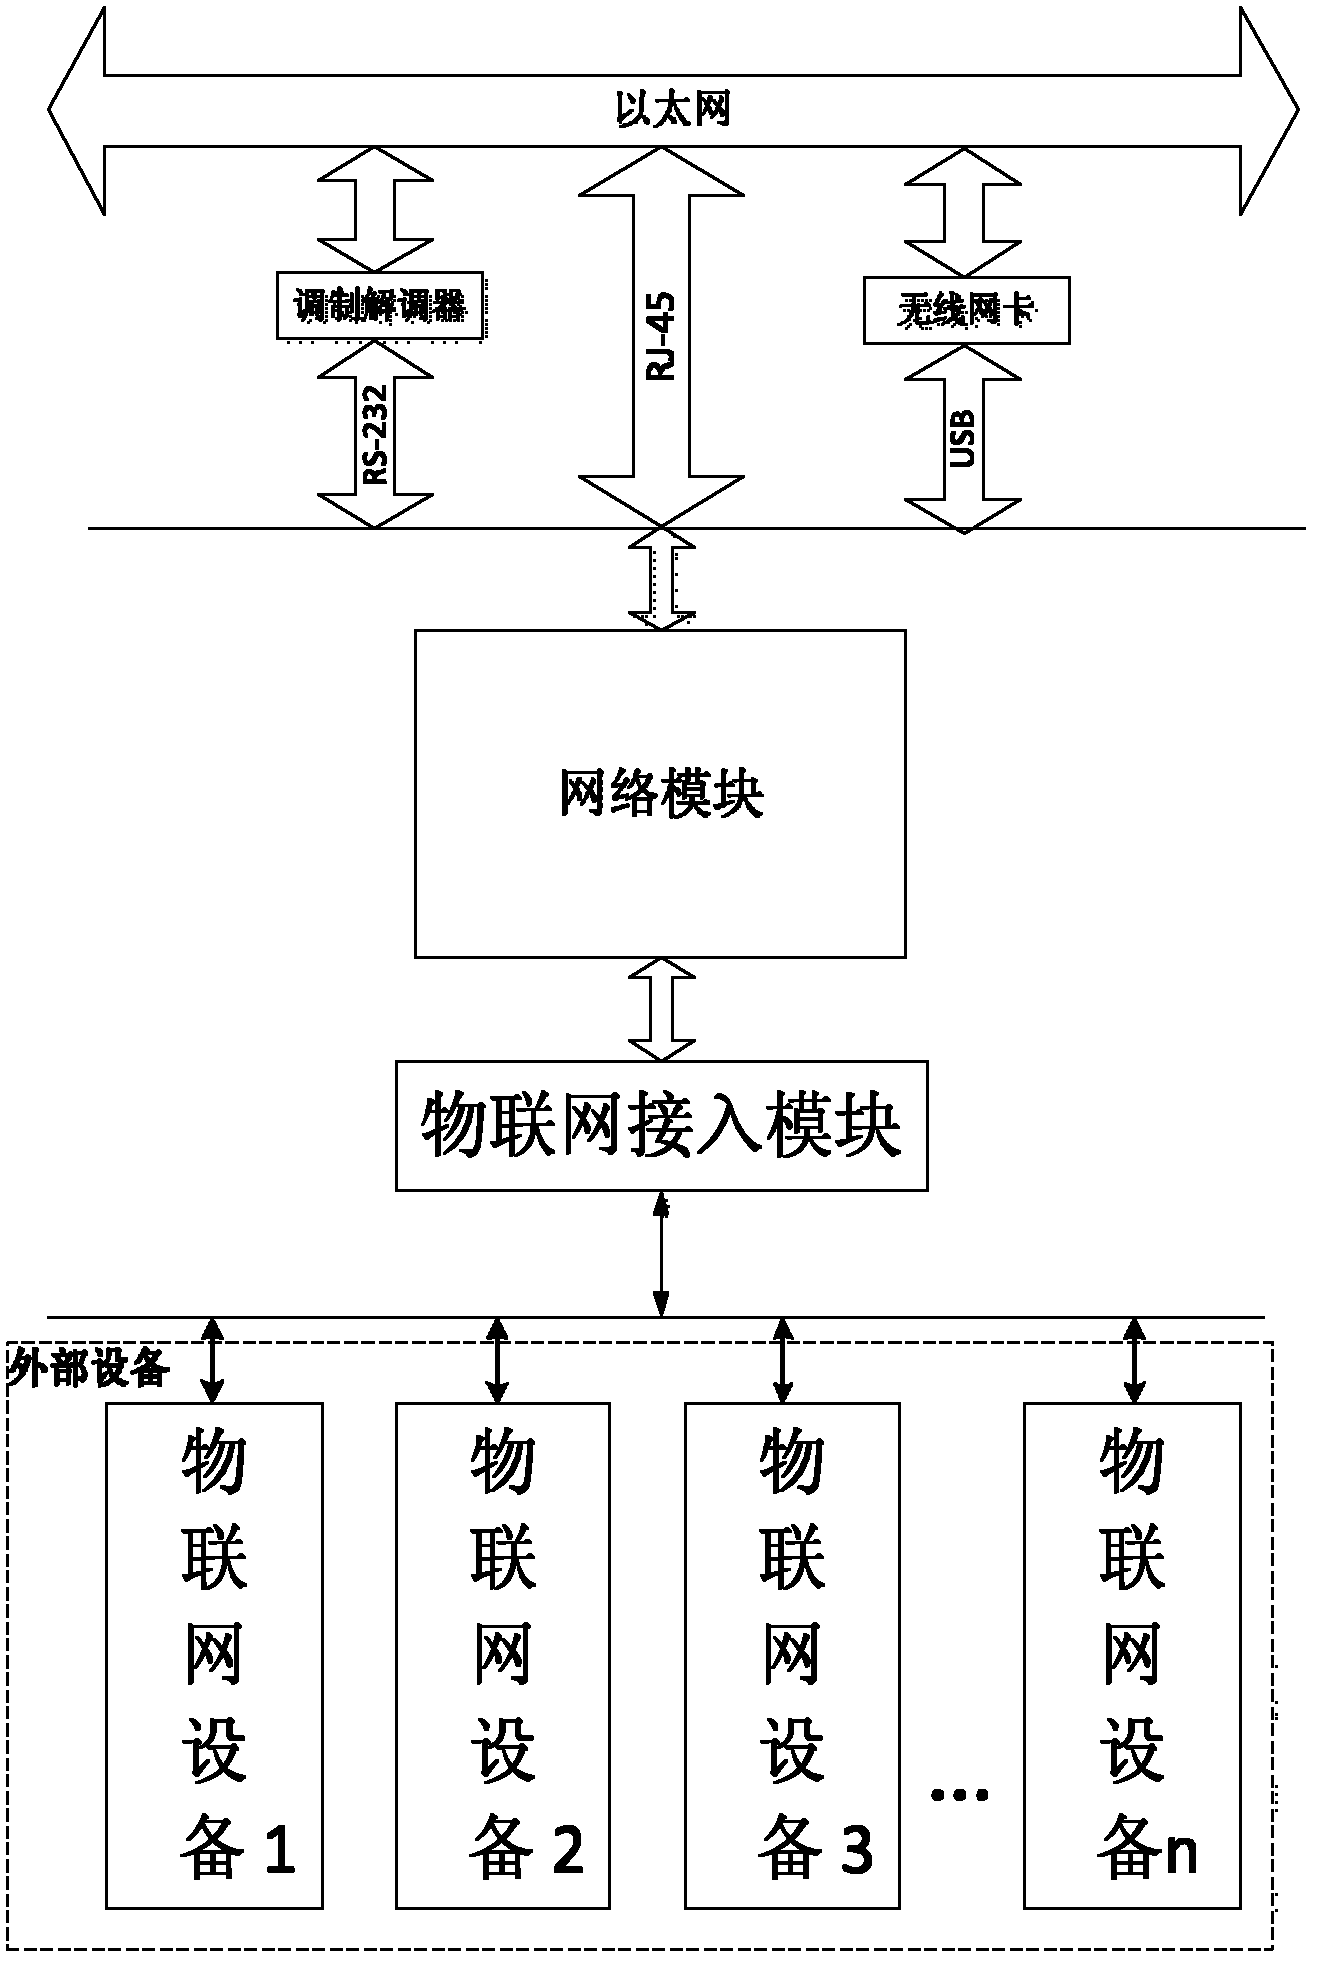 Management system and implementation method used for interconnection between industrial internet of things and Ethernet